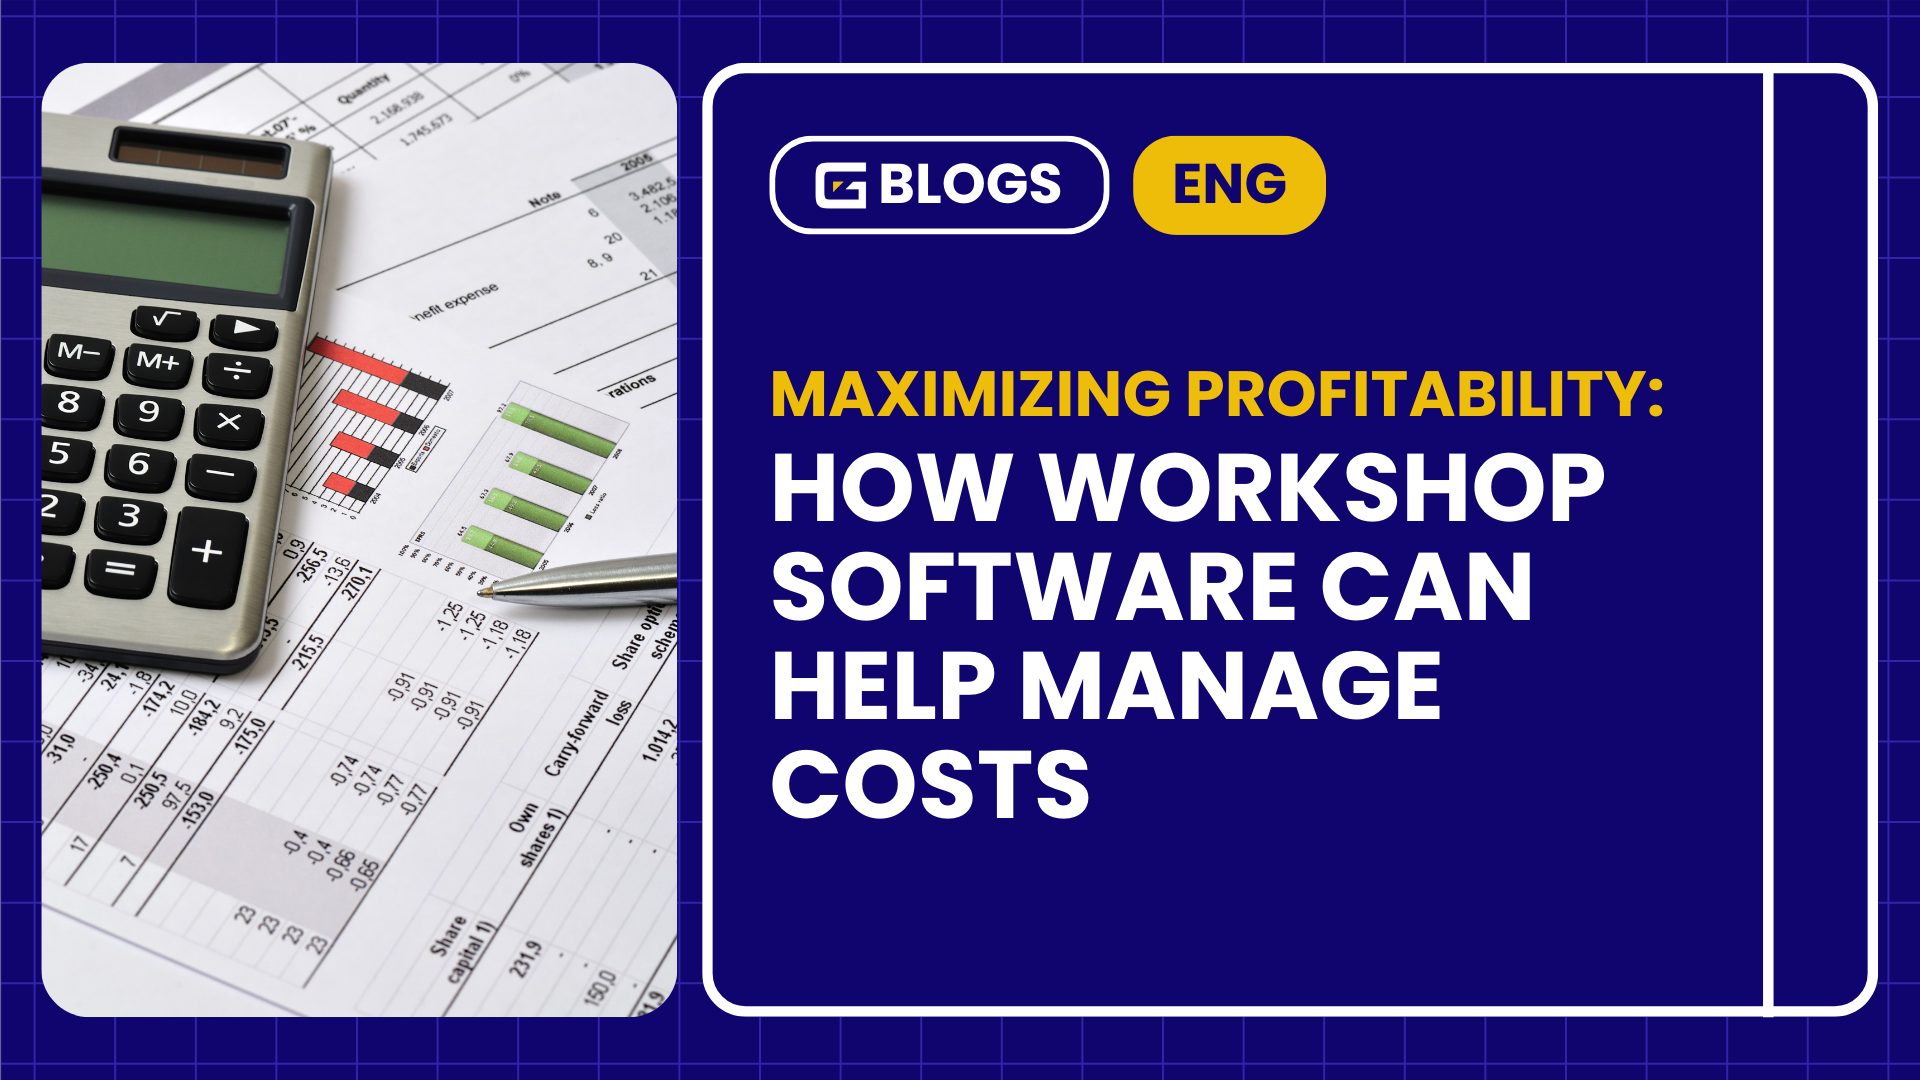 Maximizing Profitability: How Workshop Software Can Help Manage Costs